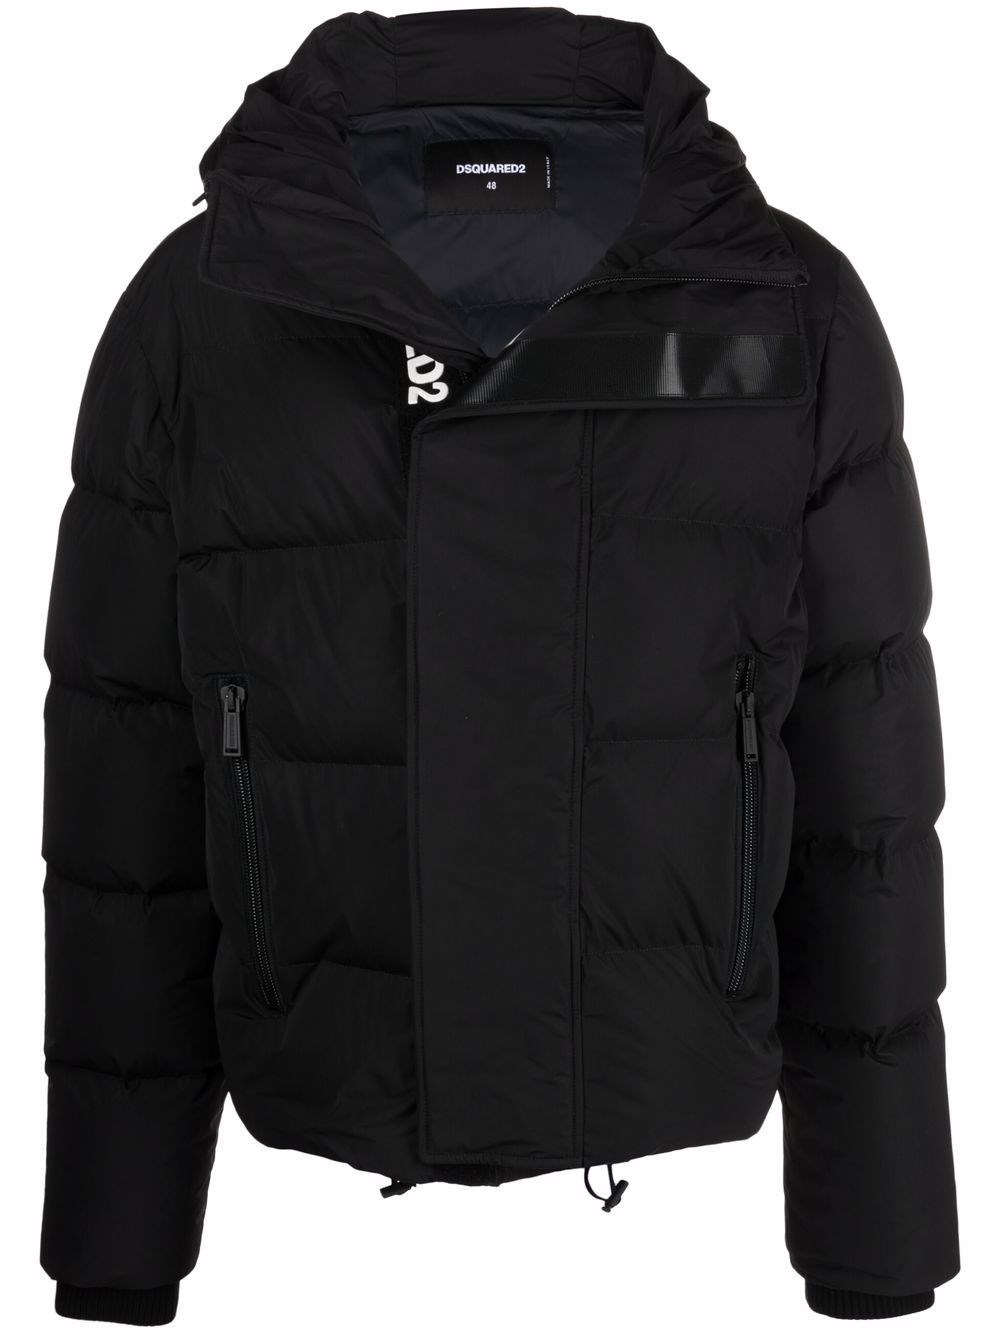 DSQUARED2 `CAMO` PUFFER JACKET